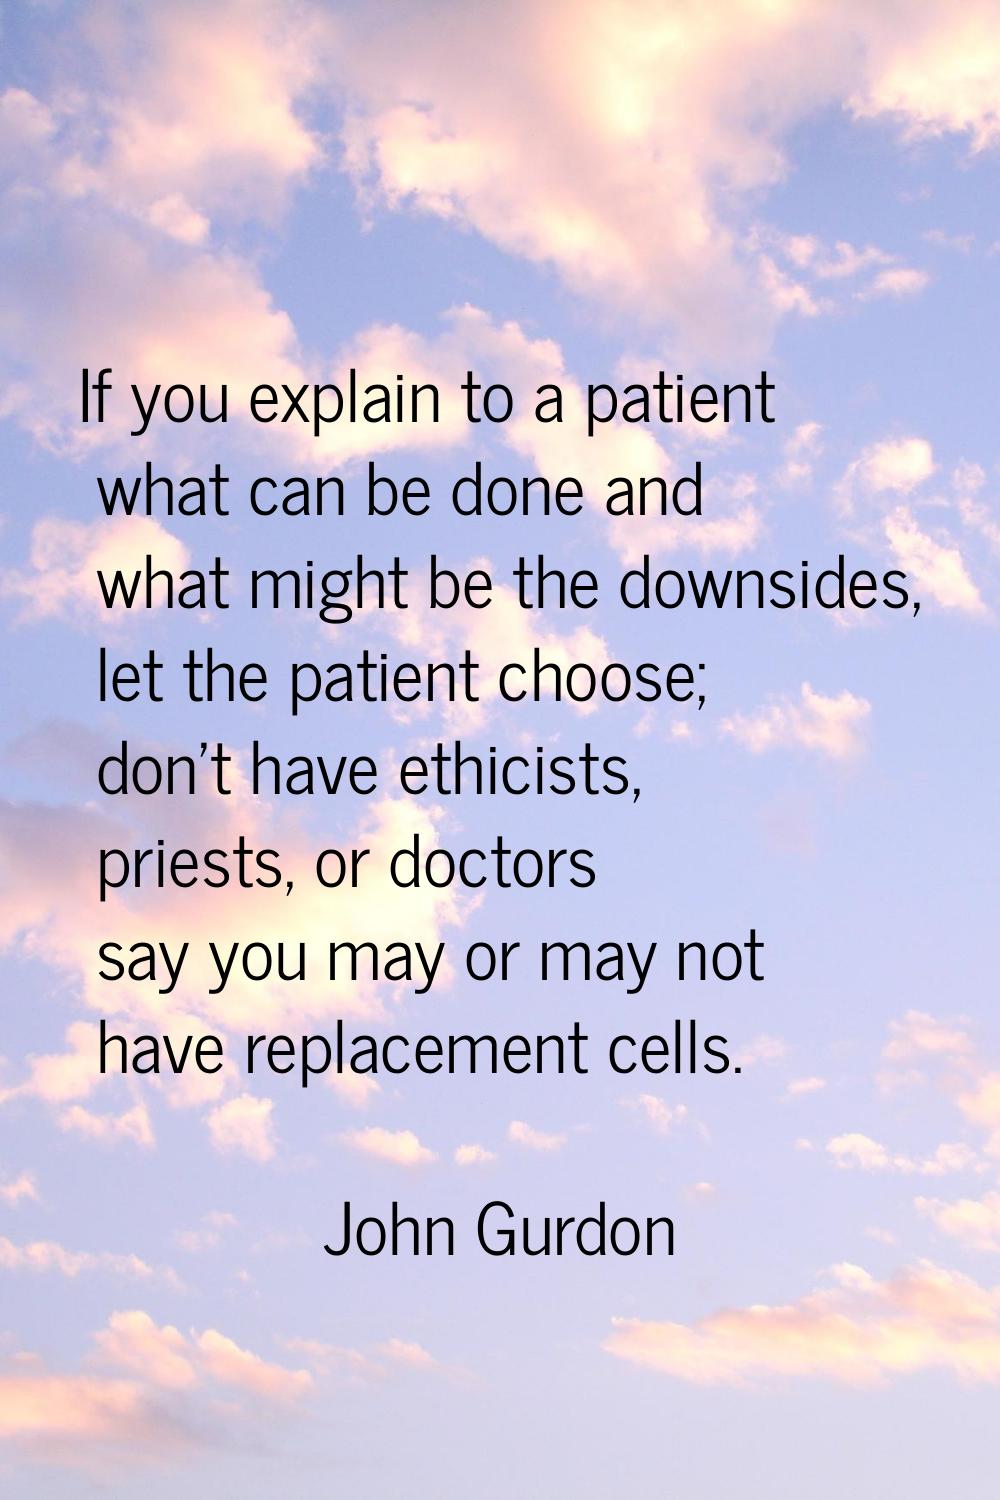 If you explain to a patient what can be done and what might be the downsides, let the patient choos